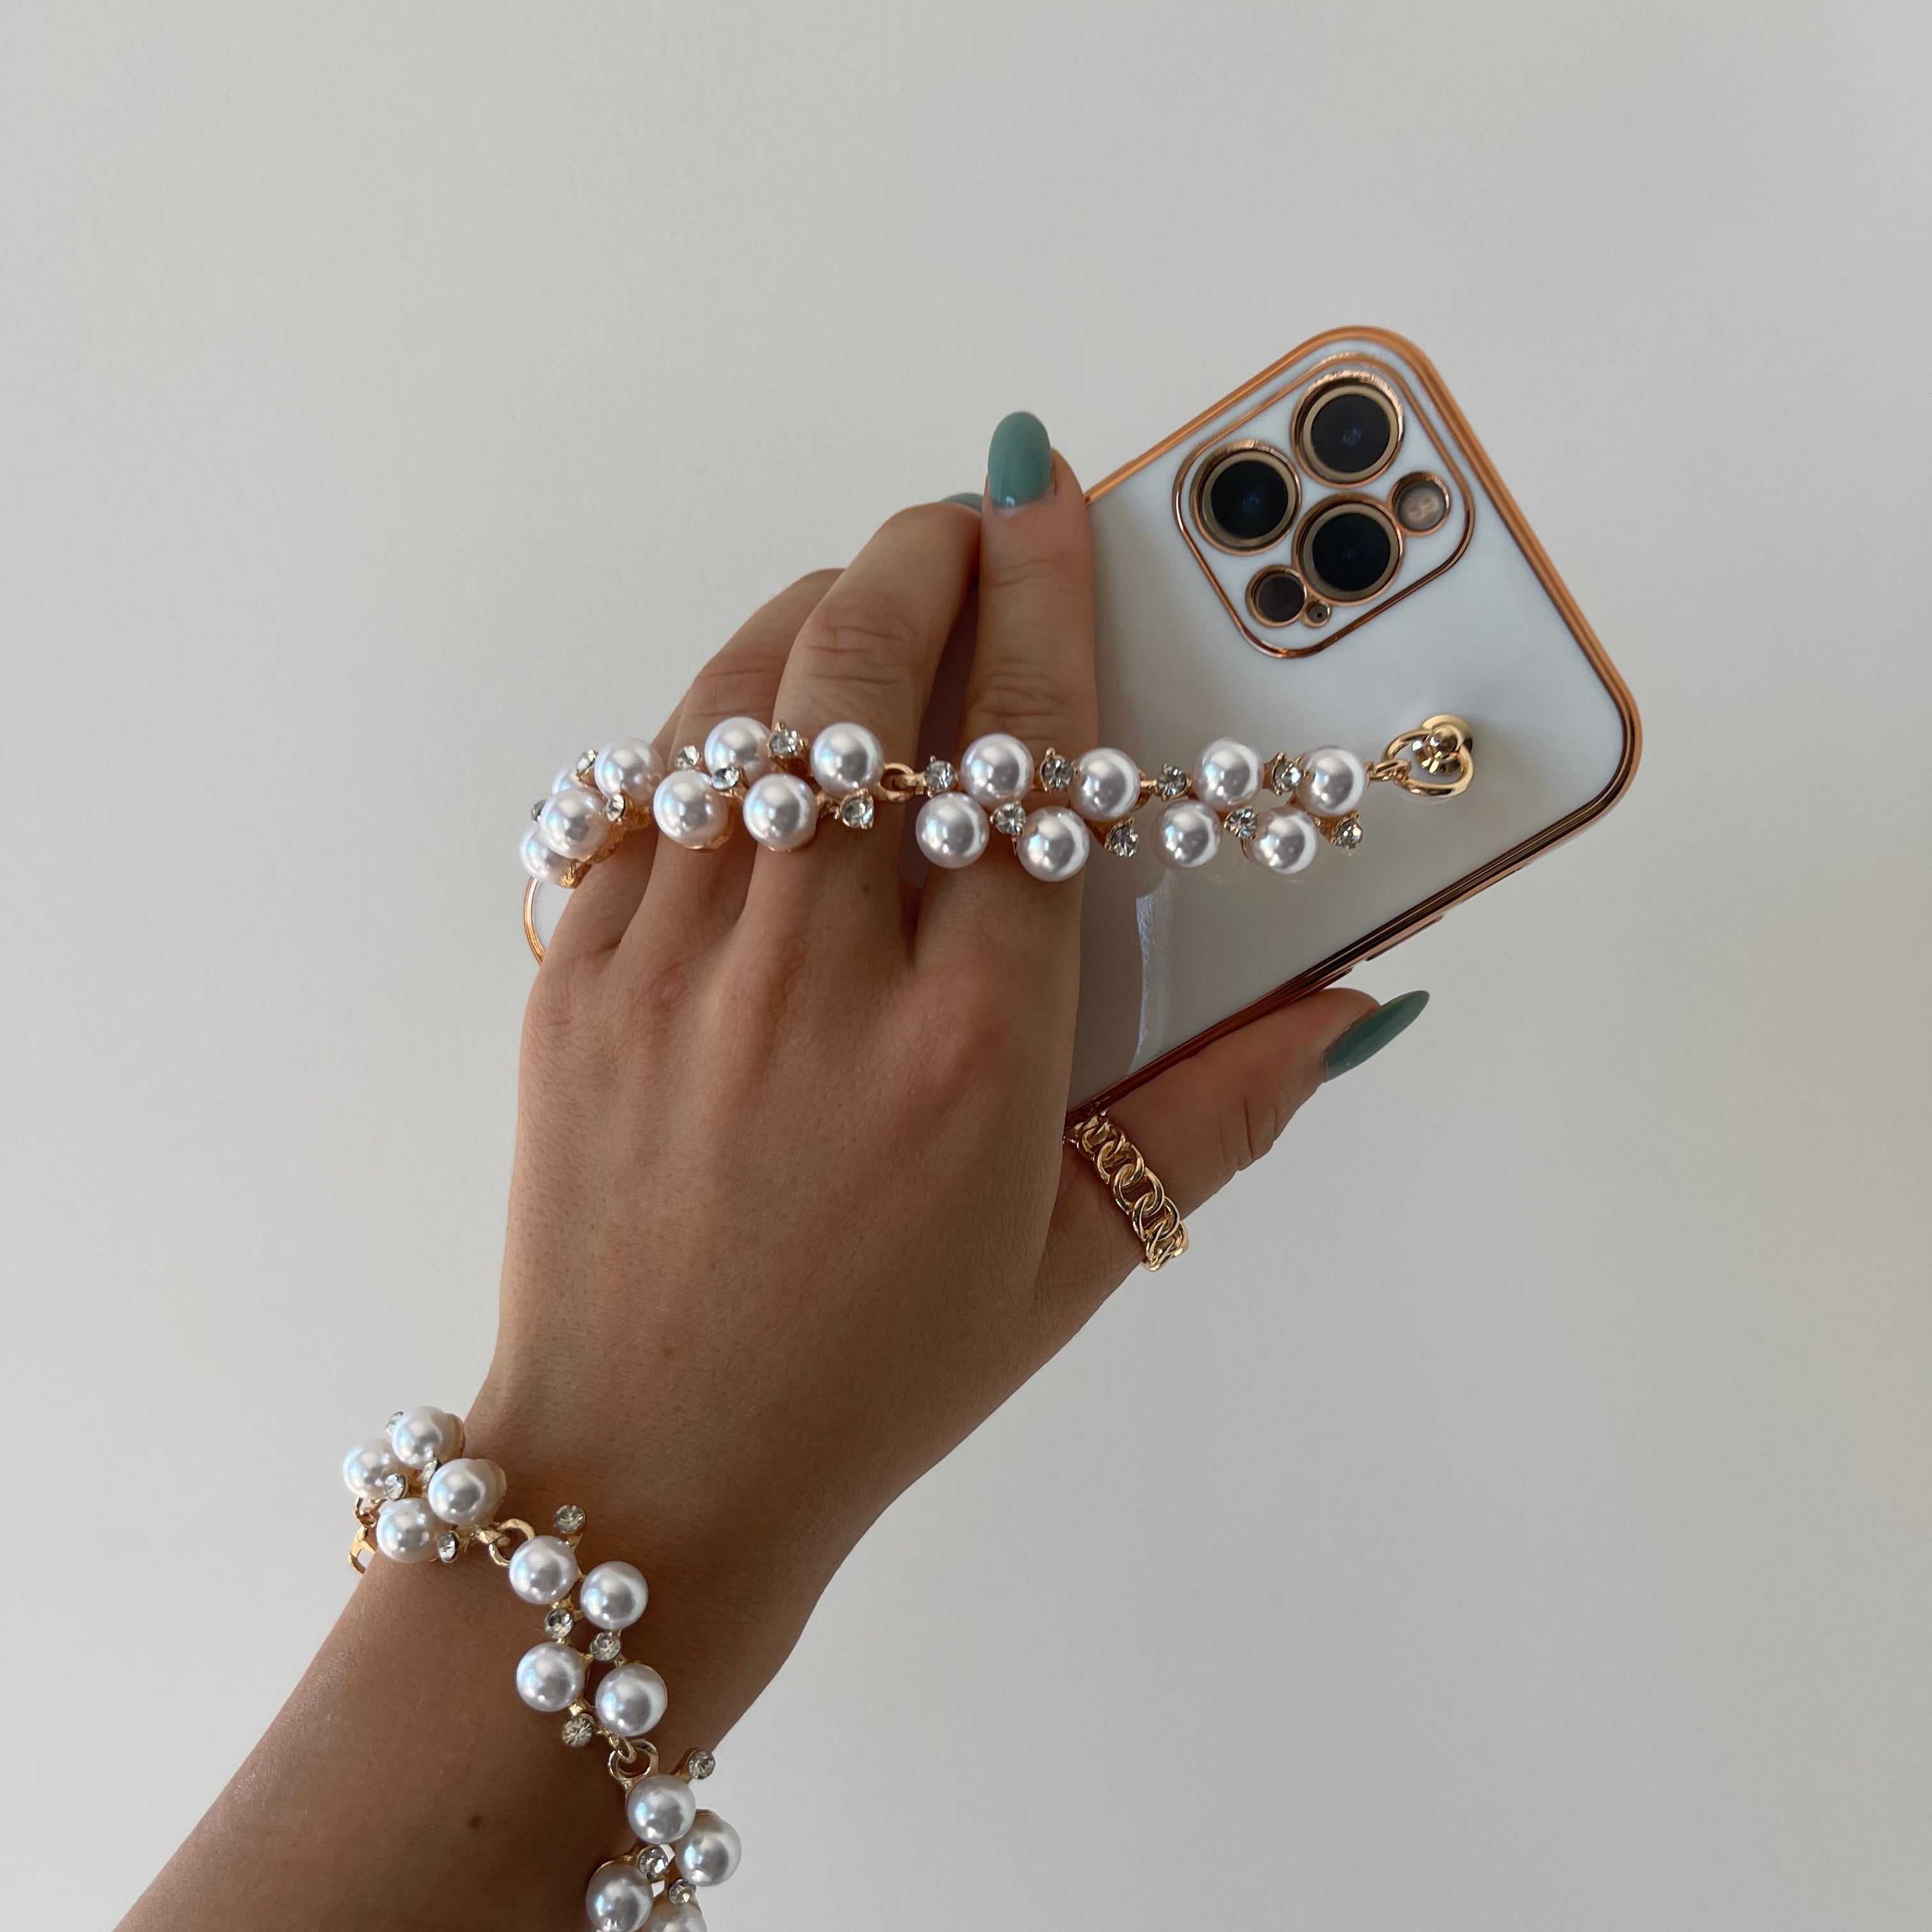 iPhone Case With Pearls Wrist Bracelet